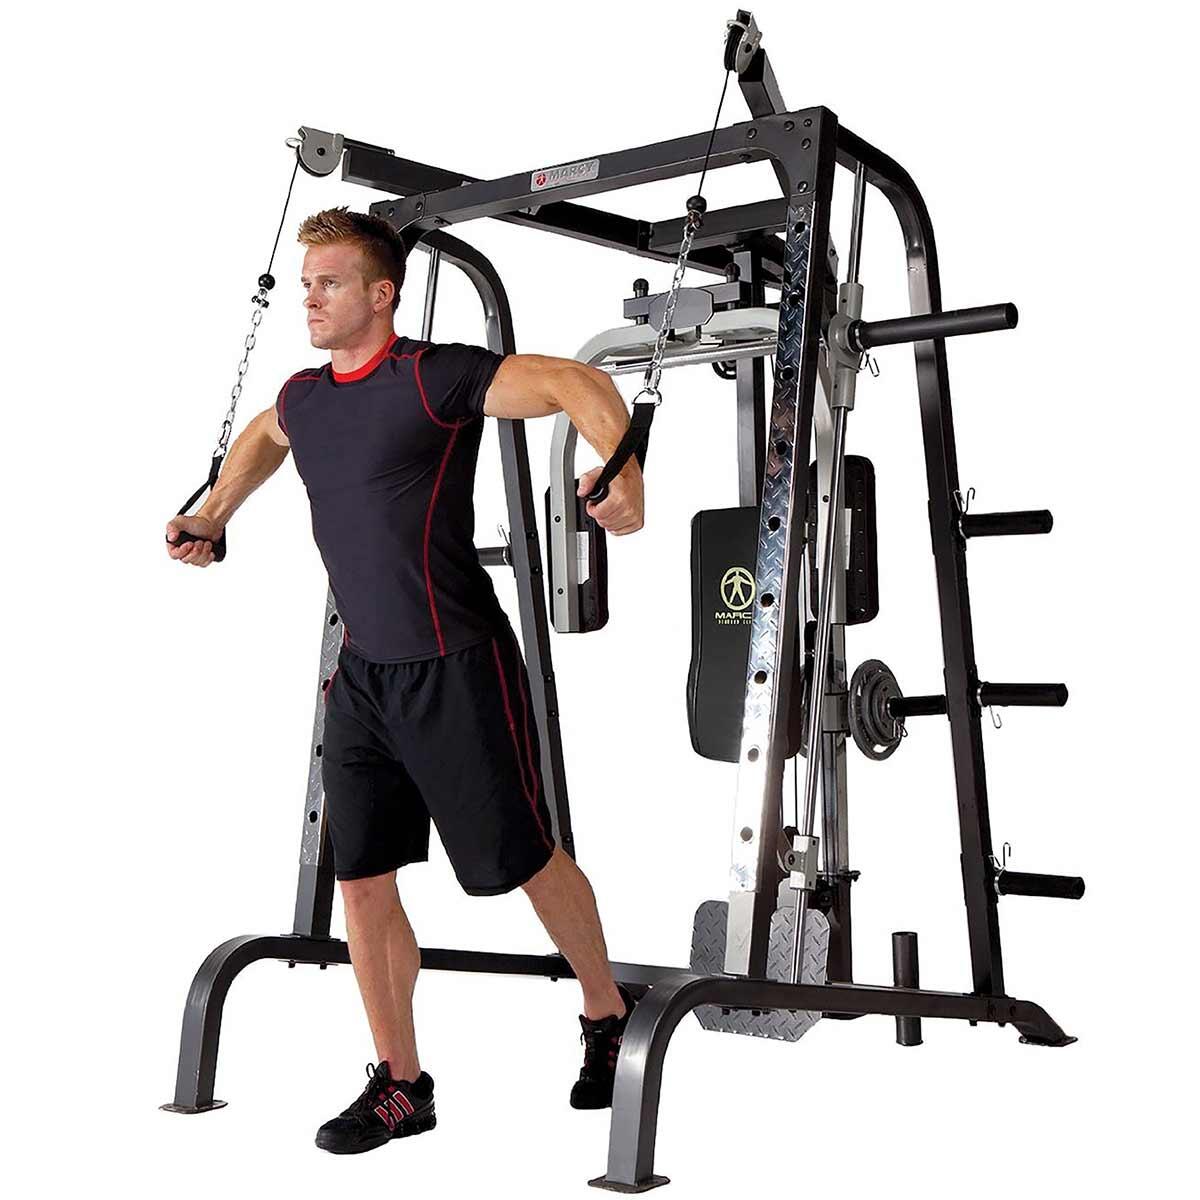 MARCY MD9010G DIAMOND ELITE DELUXE SMITH MACHINE WITH WEIGHT BENCH 3/8